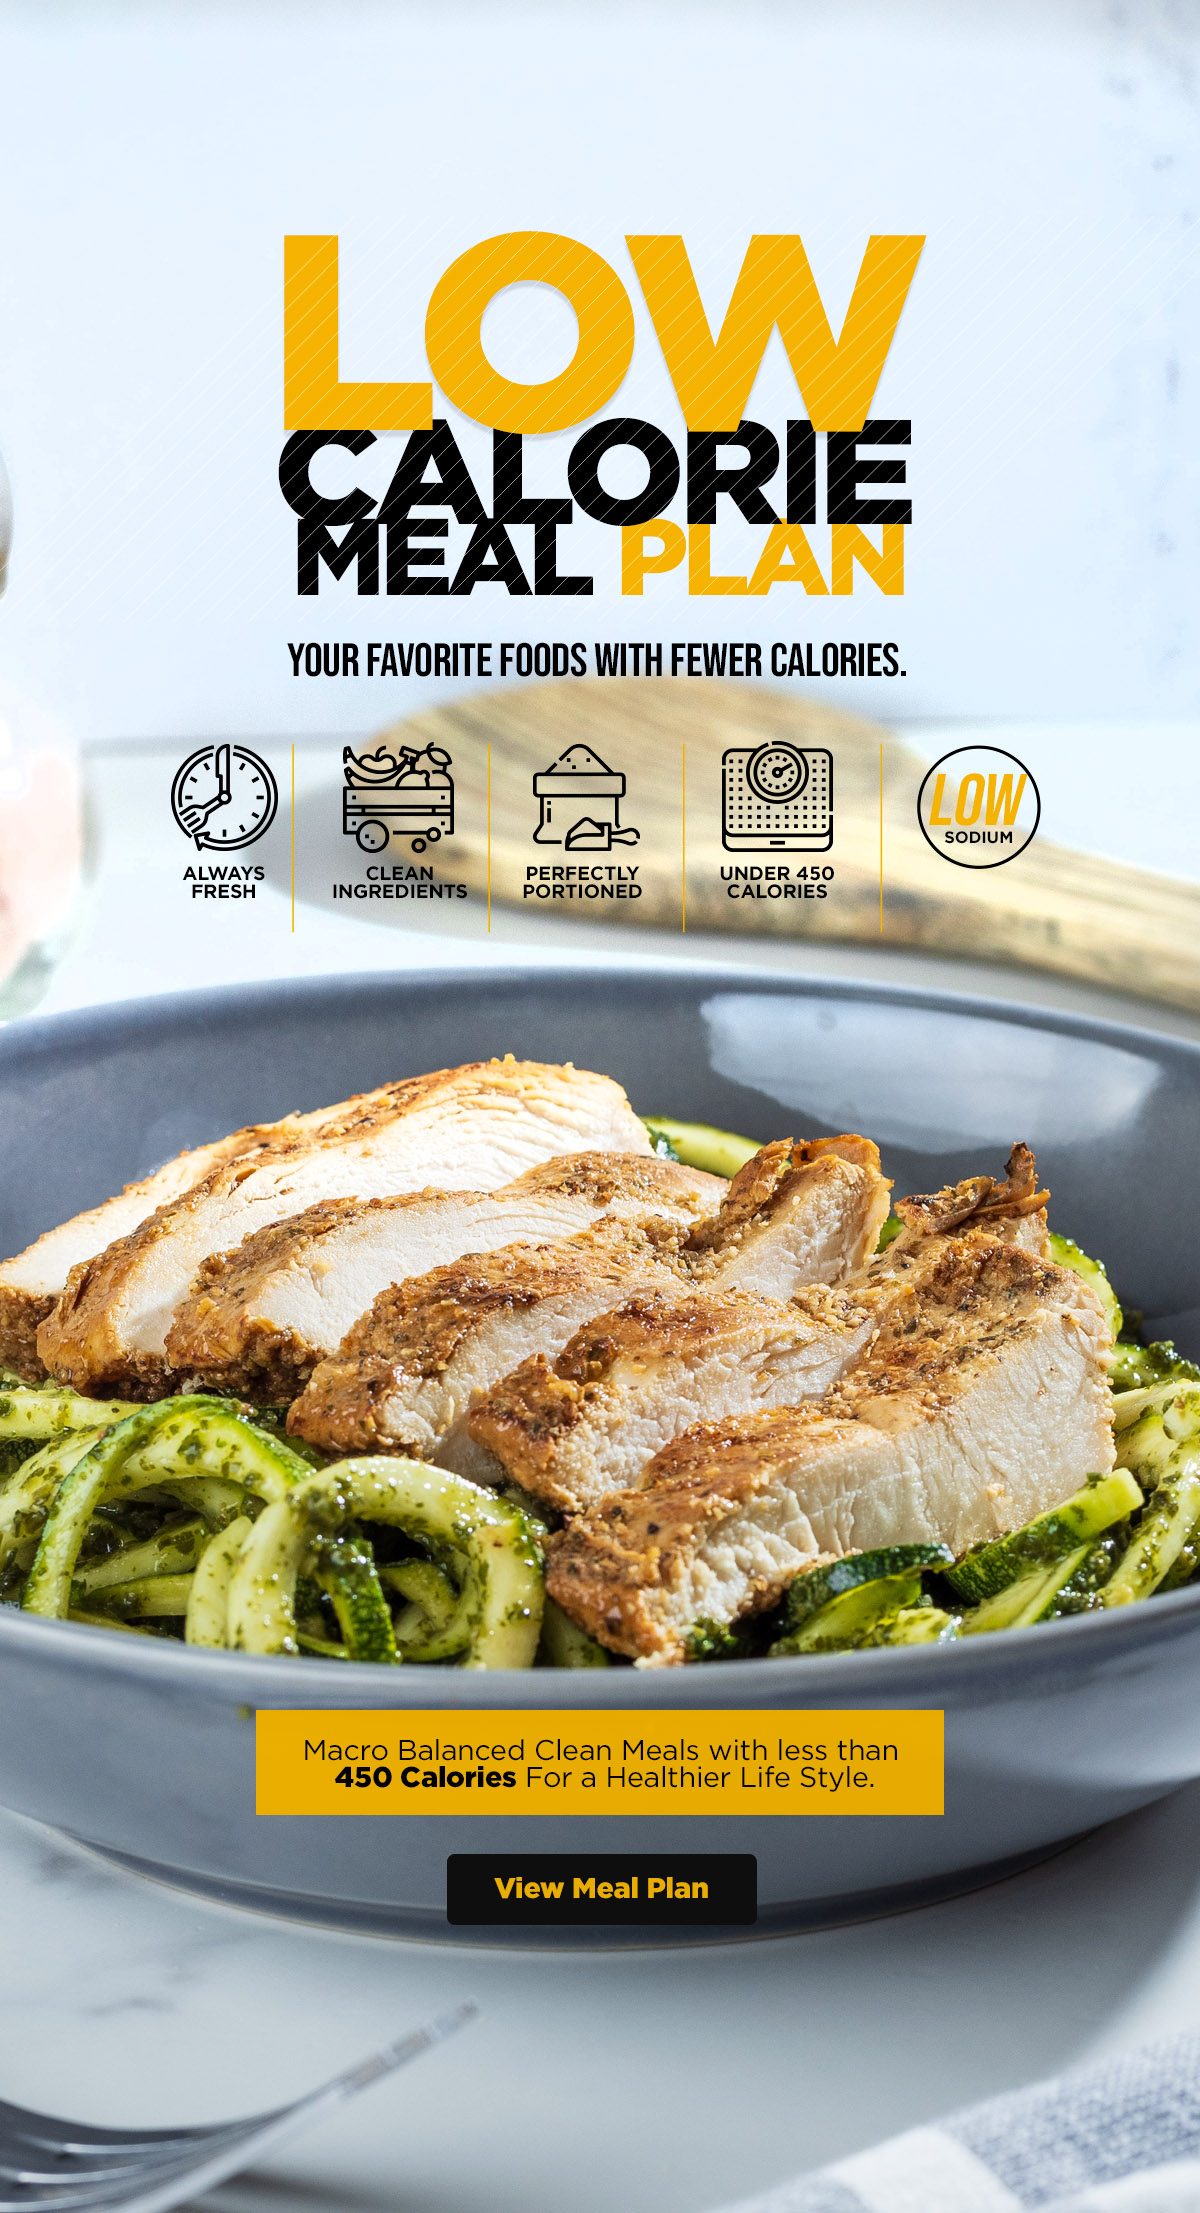 Low Calorie Meal Plan - Your Favorite Foods with Fewer Calories.